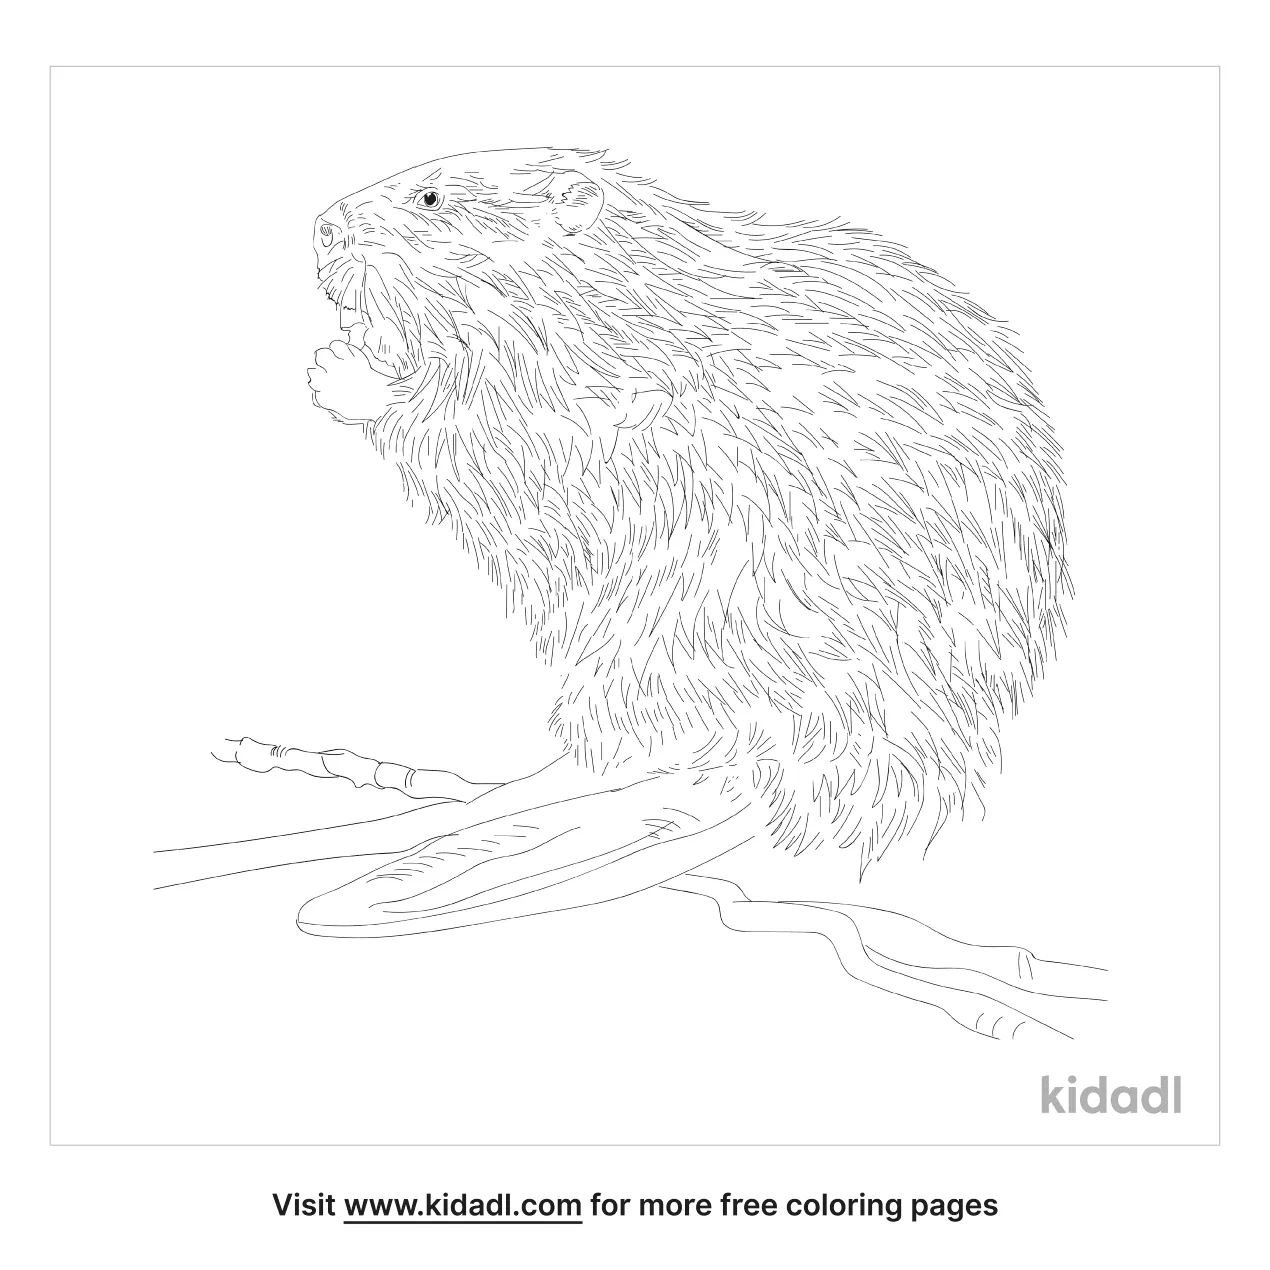 North American Beaver Coloring Page